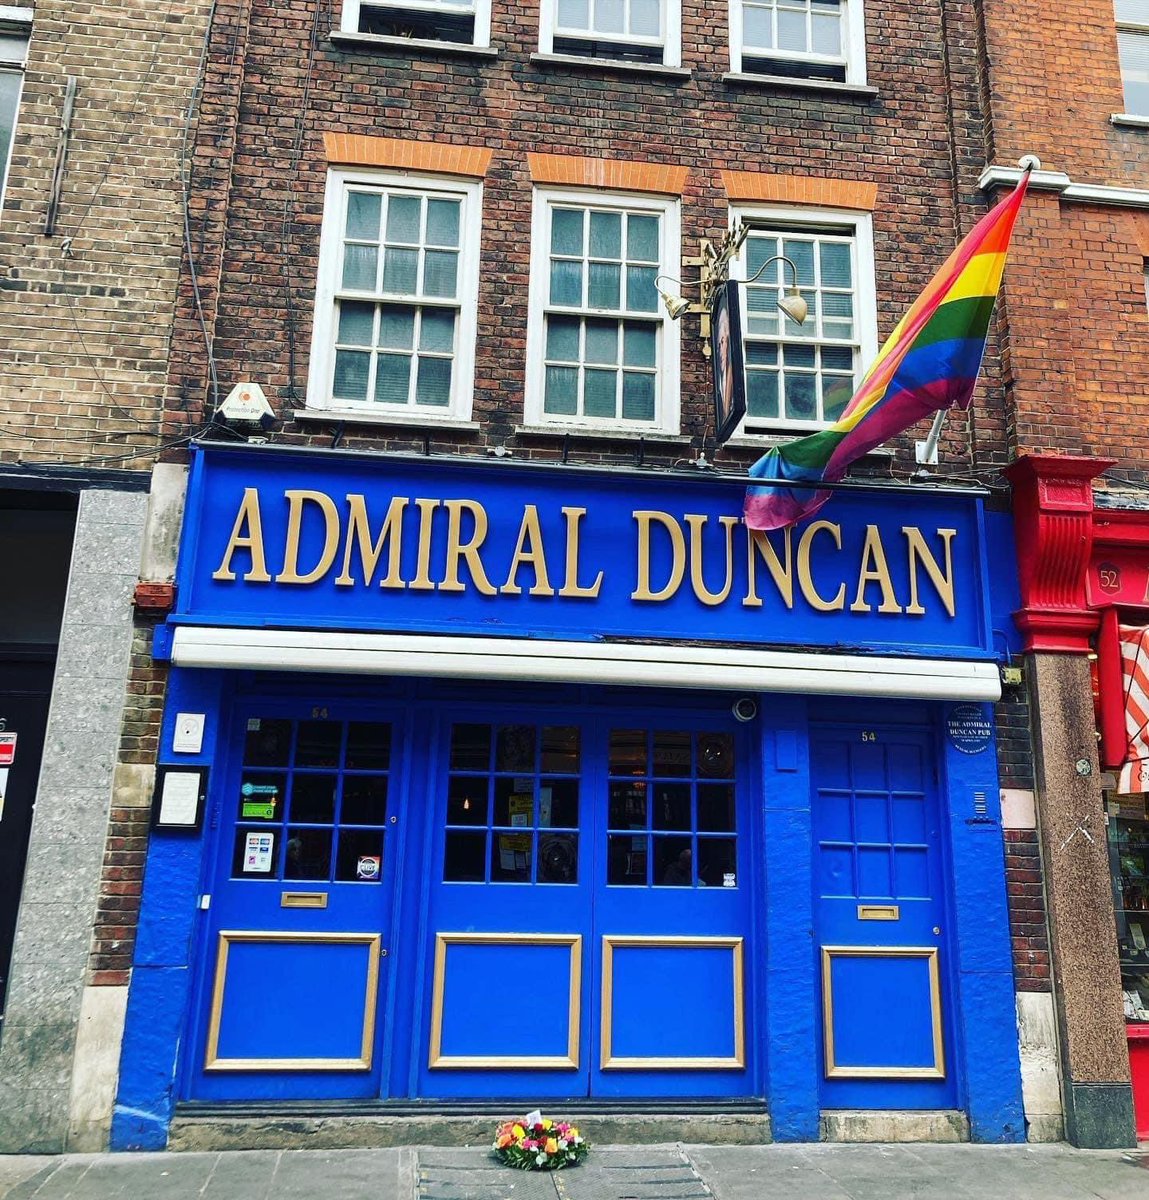 Today, 25 years on from the horrific attack on the Admiral Duncan, we remember those lost, injured and their families and friends with love in our hearts!